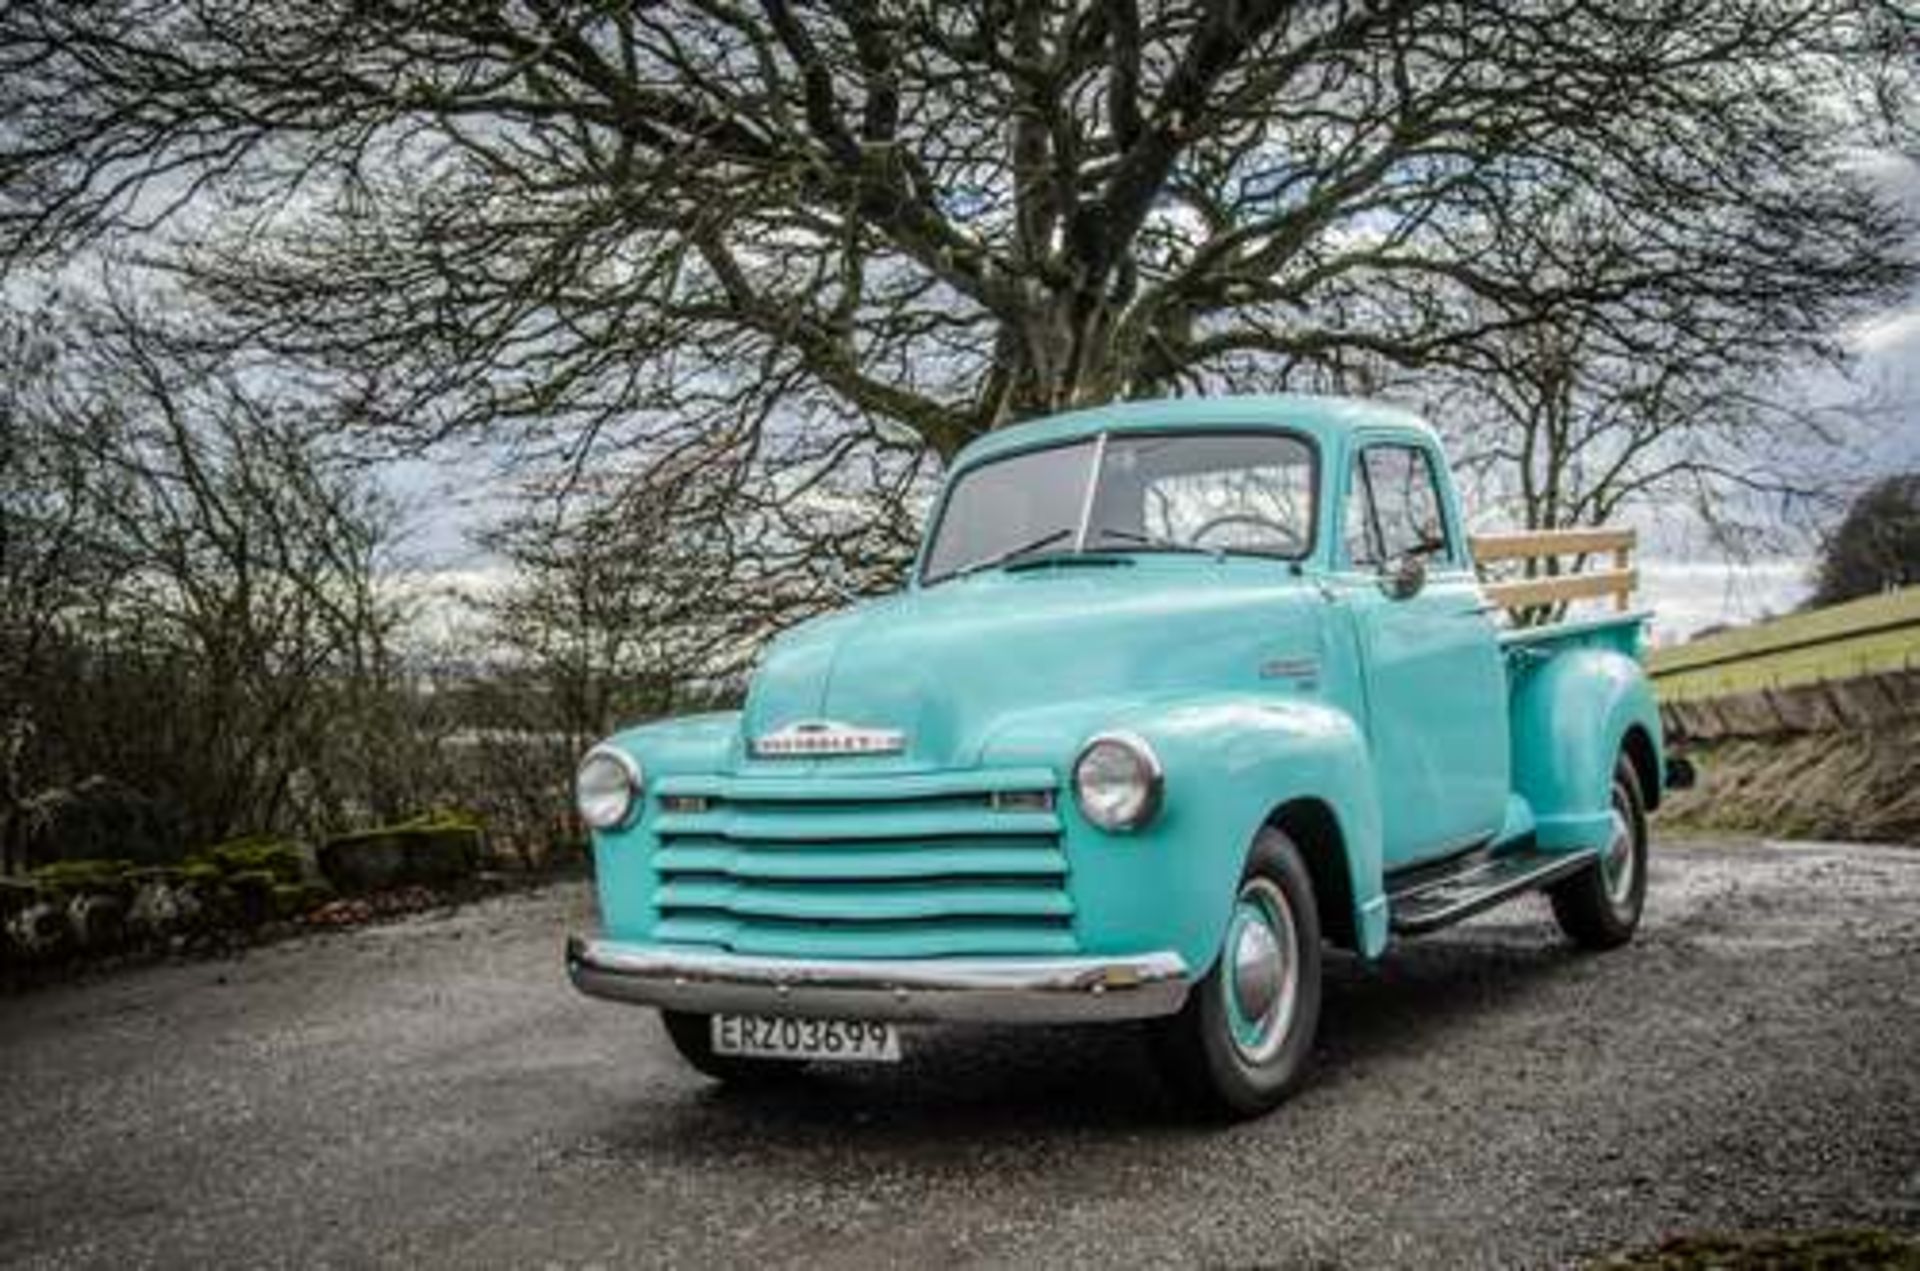 CHEVROLET 3100 PICK UP - 3500cc - Image 3 of 16